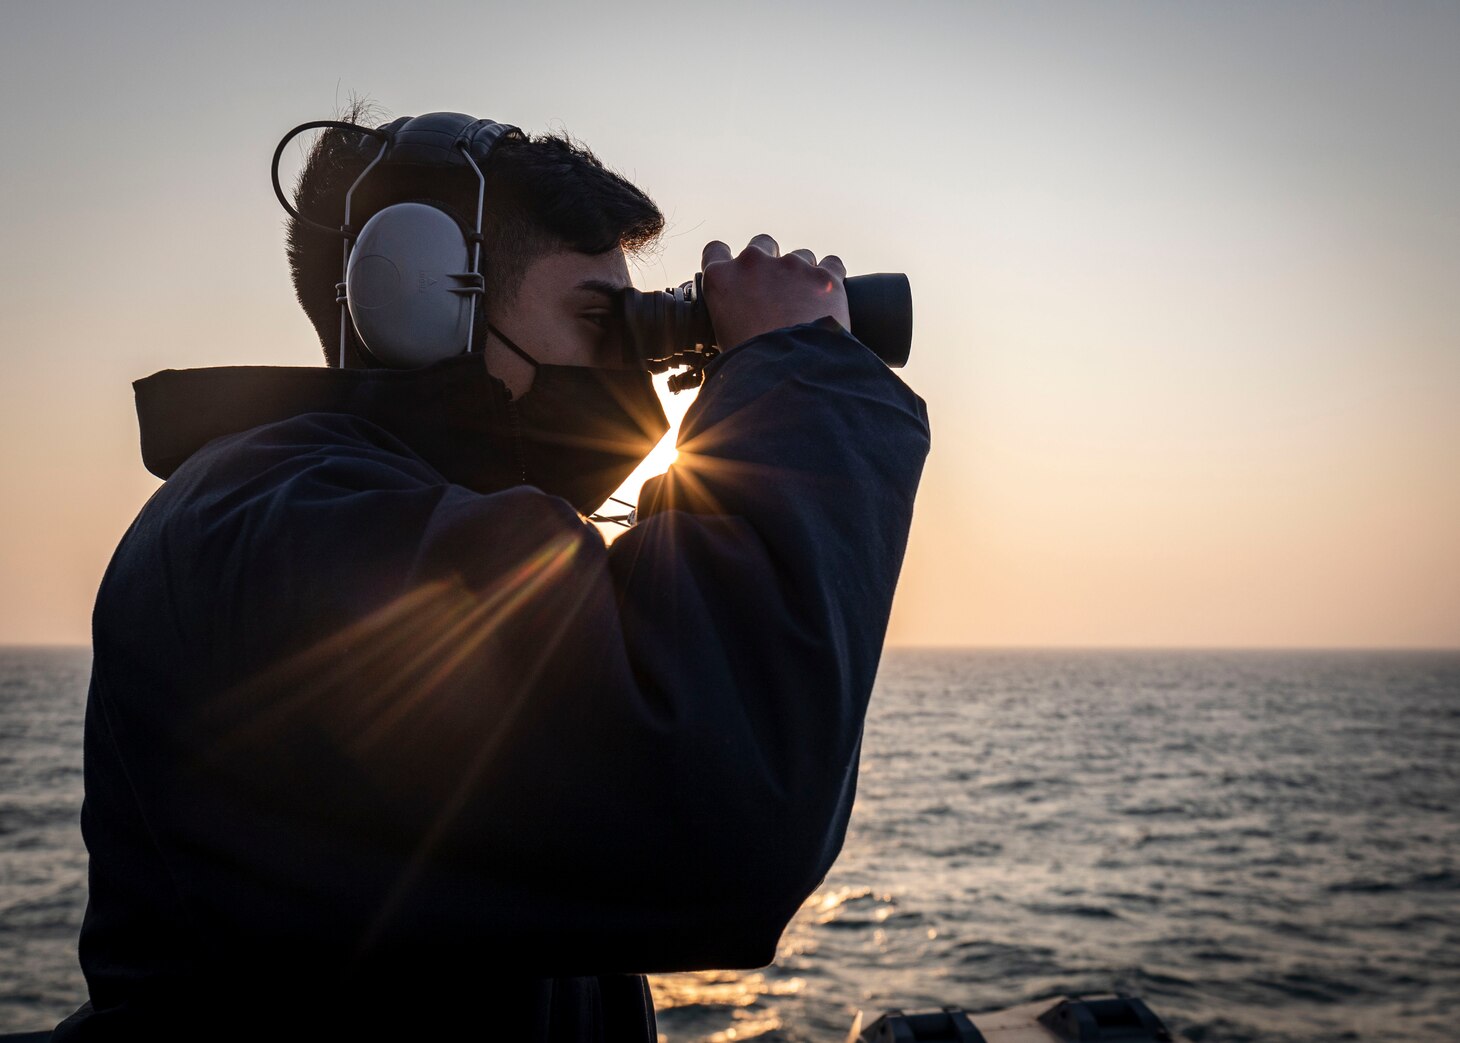 TAIWAN STRAIT - Seaman Frank Medina, from Dallas, Texas, scans the horizon while standing on the bridge wing aboard the Arleigh Burke-class guided-missile destroyer USS John S. McCain (DDG 56) as the ship conducts routine underway operations. McCain is forward-deployed to the U.S. 7th Fleet area of operations in support of security and stability in the Indo-Pacific region.